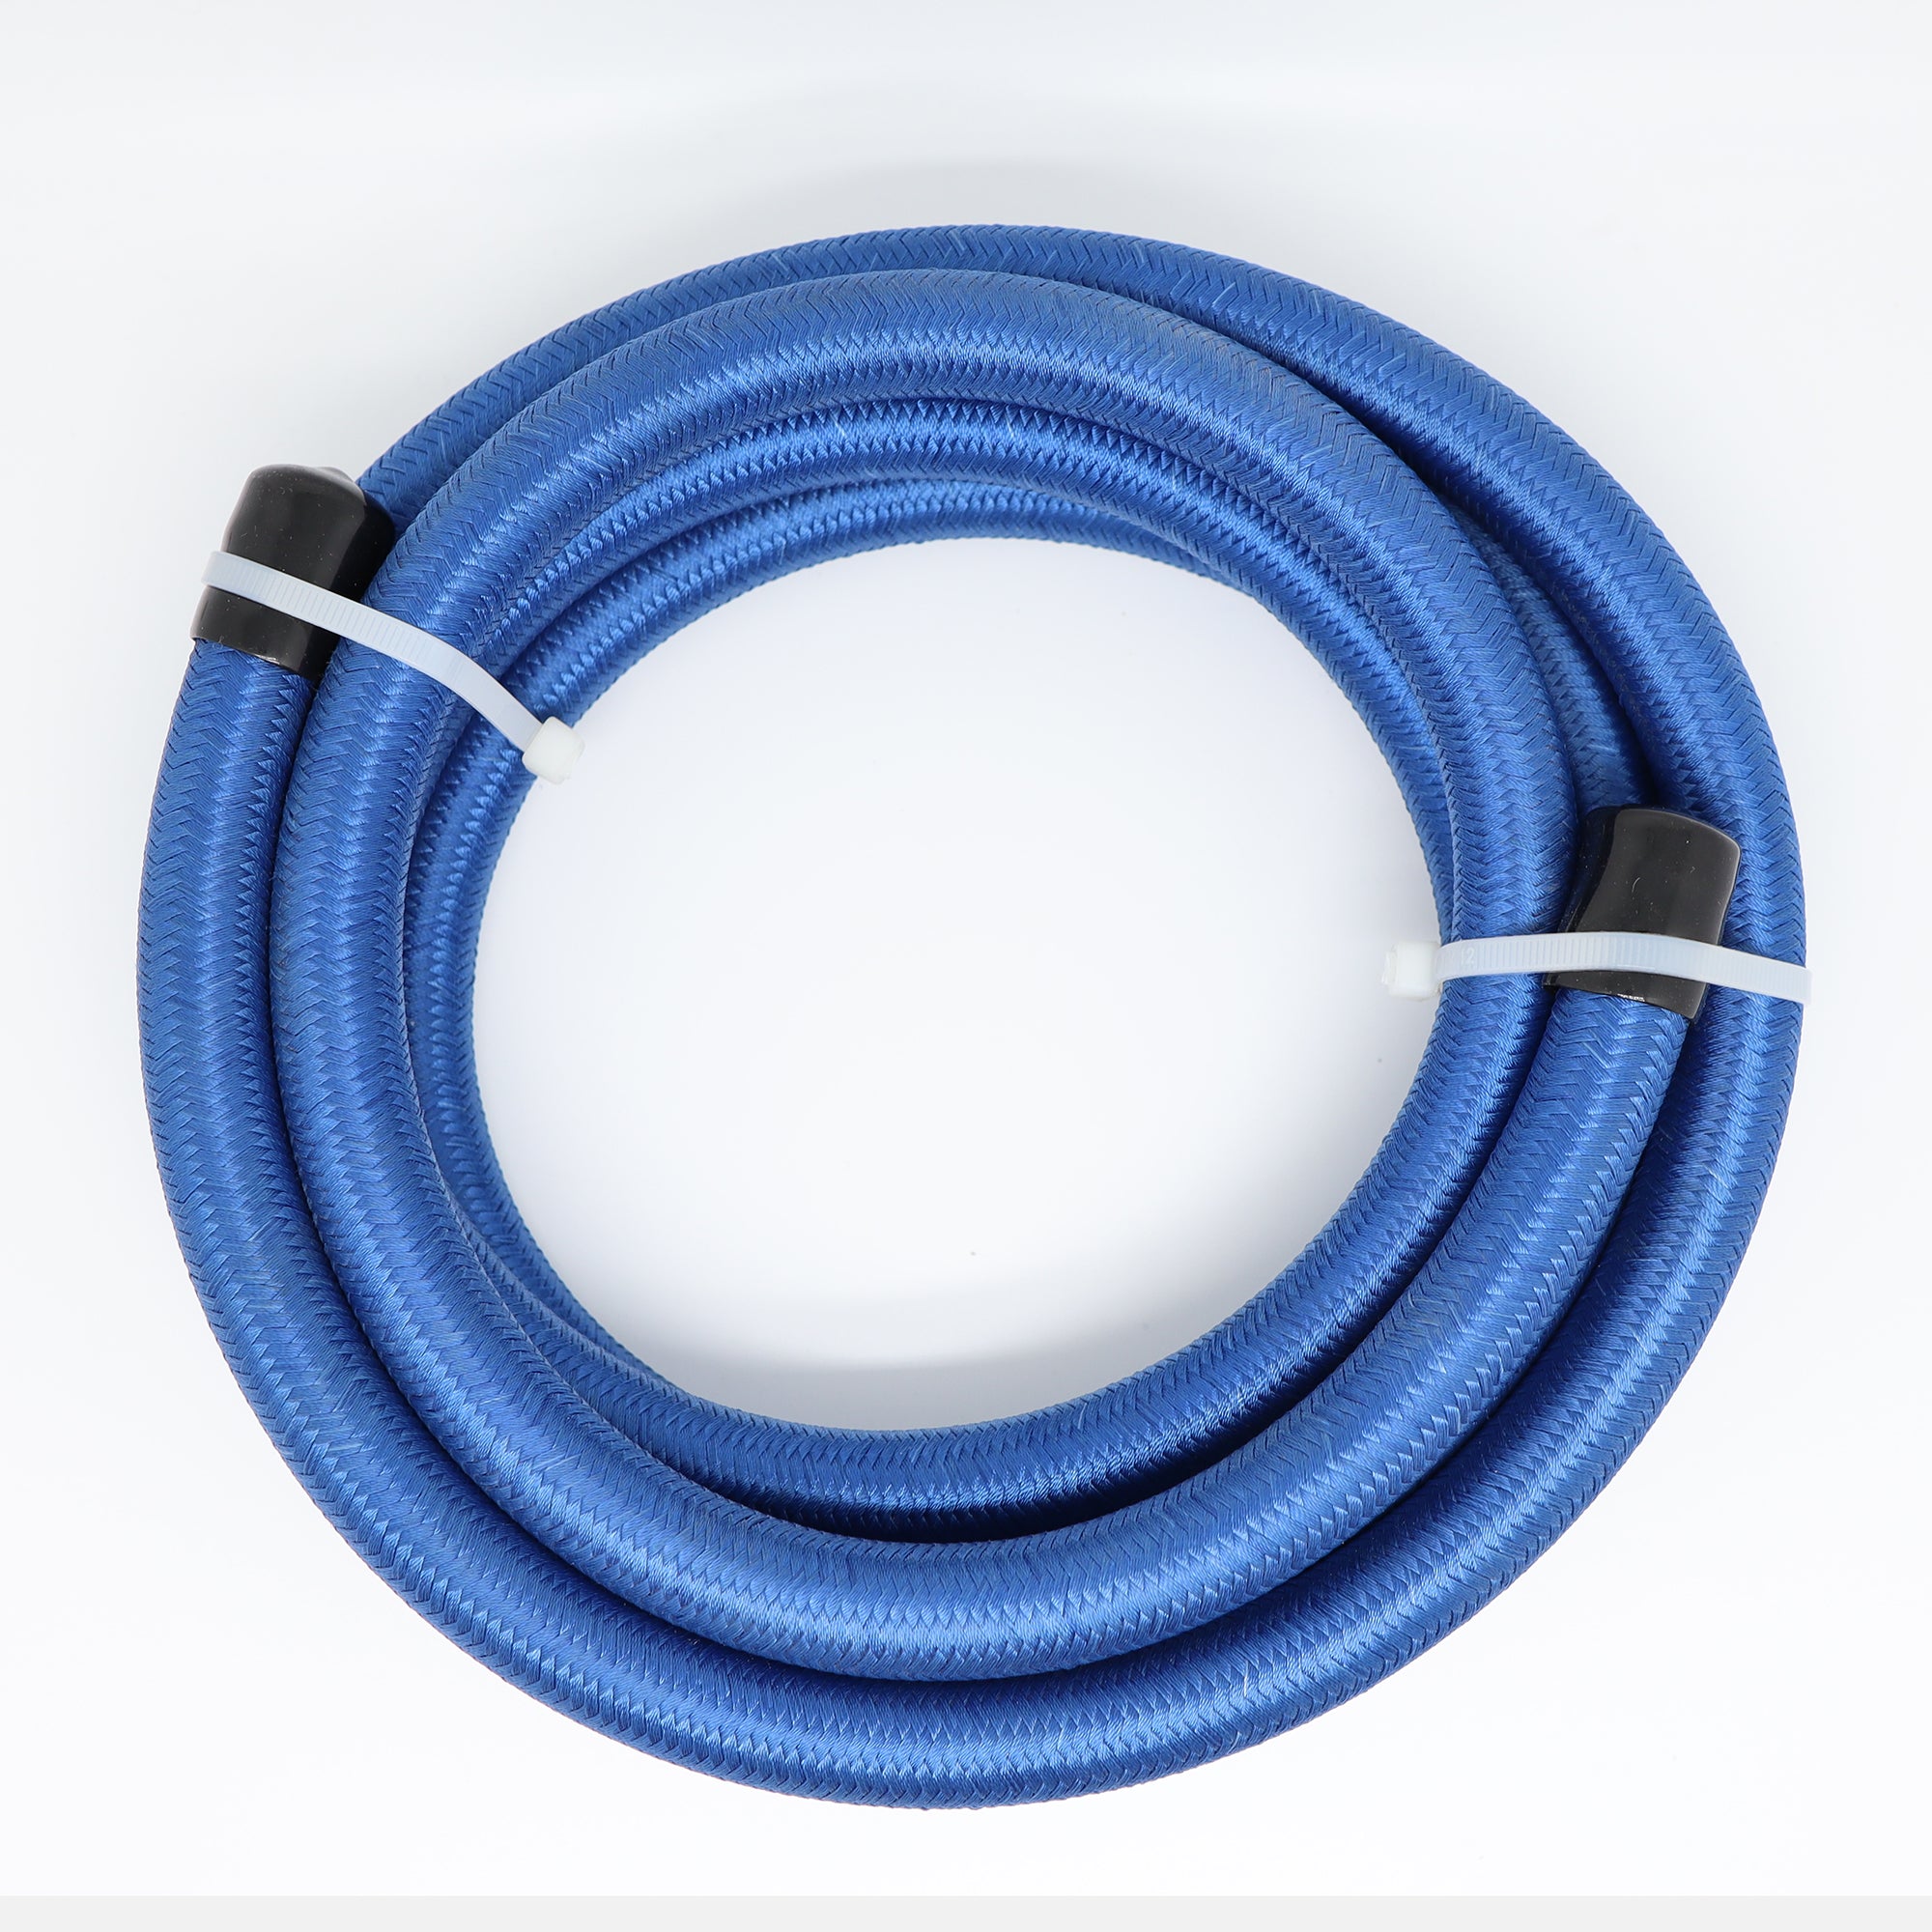 5/16" 8MM NYLON STAINLESS STEEL BRAIDED PTFE FUEL HOSE BLUE 1FT